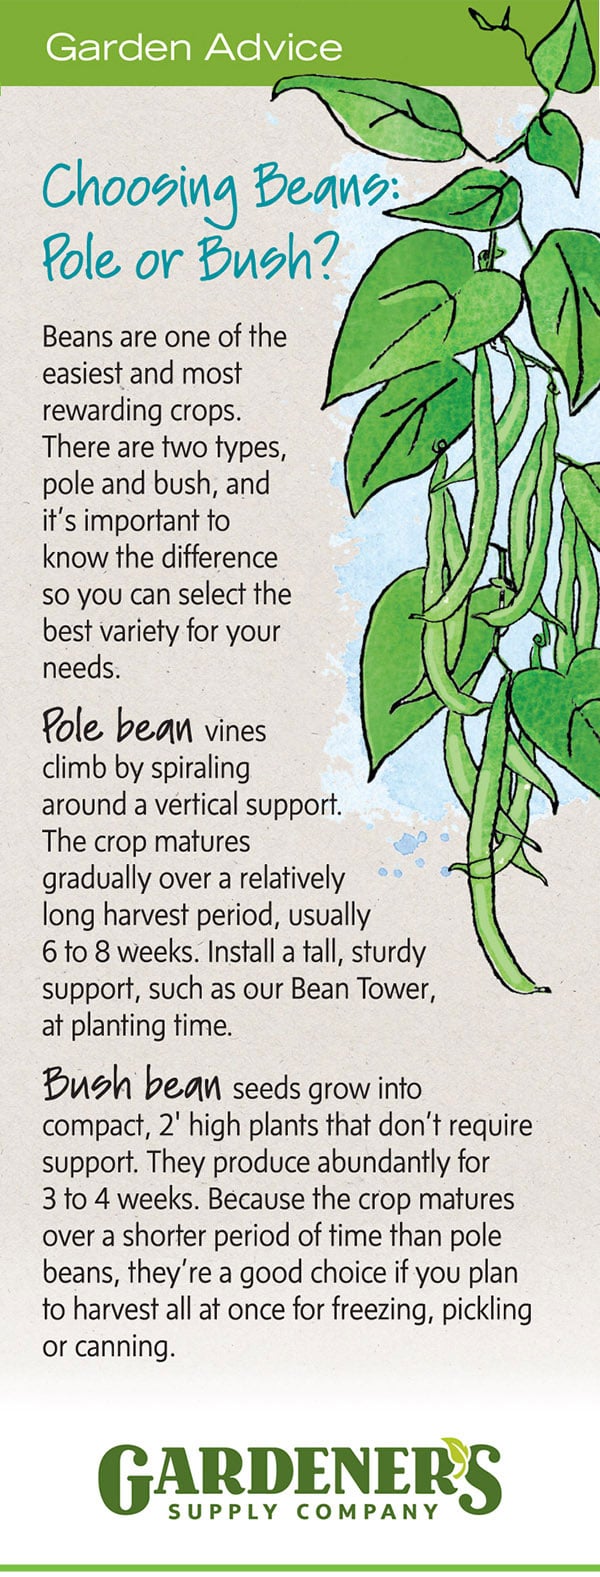 How to choose pole beans or bush beans